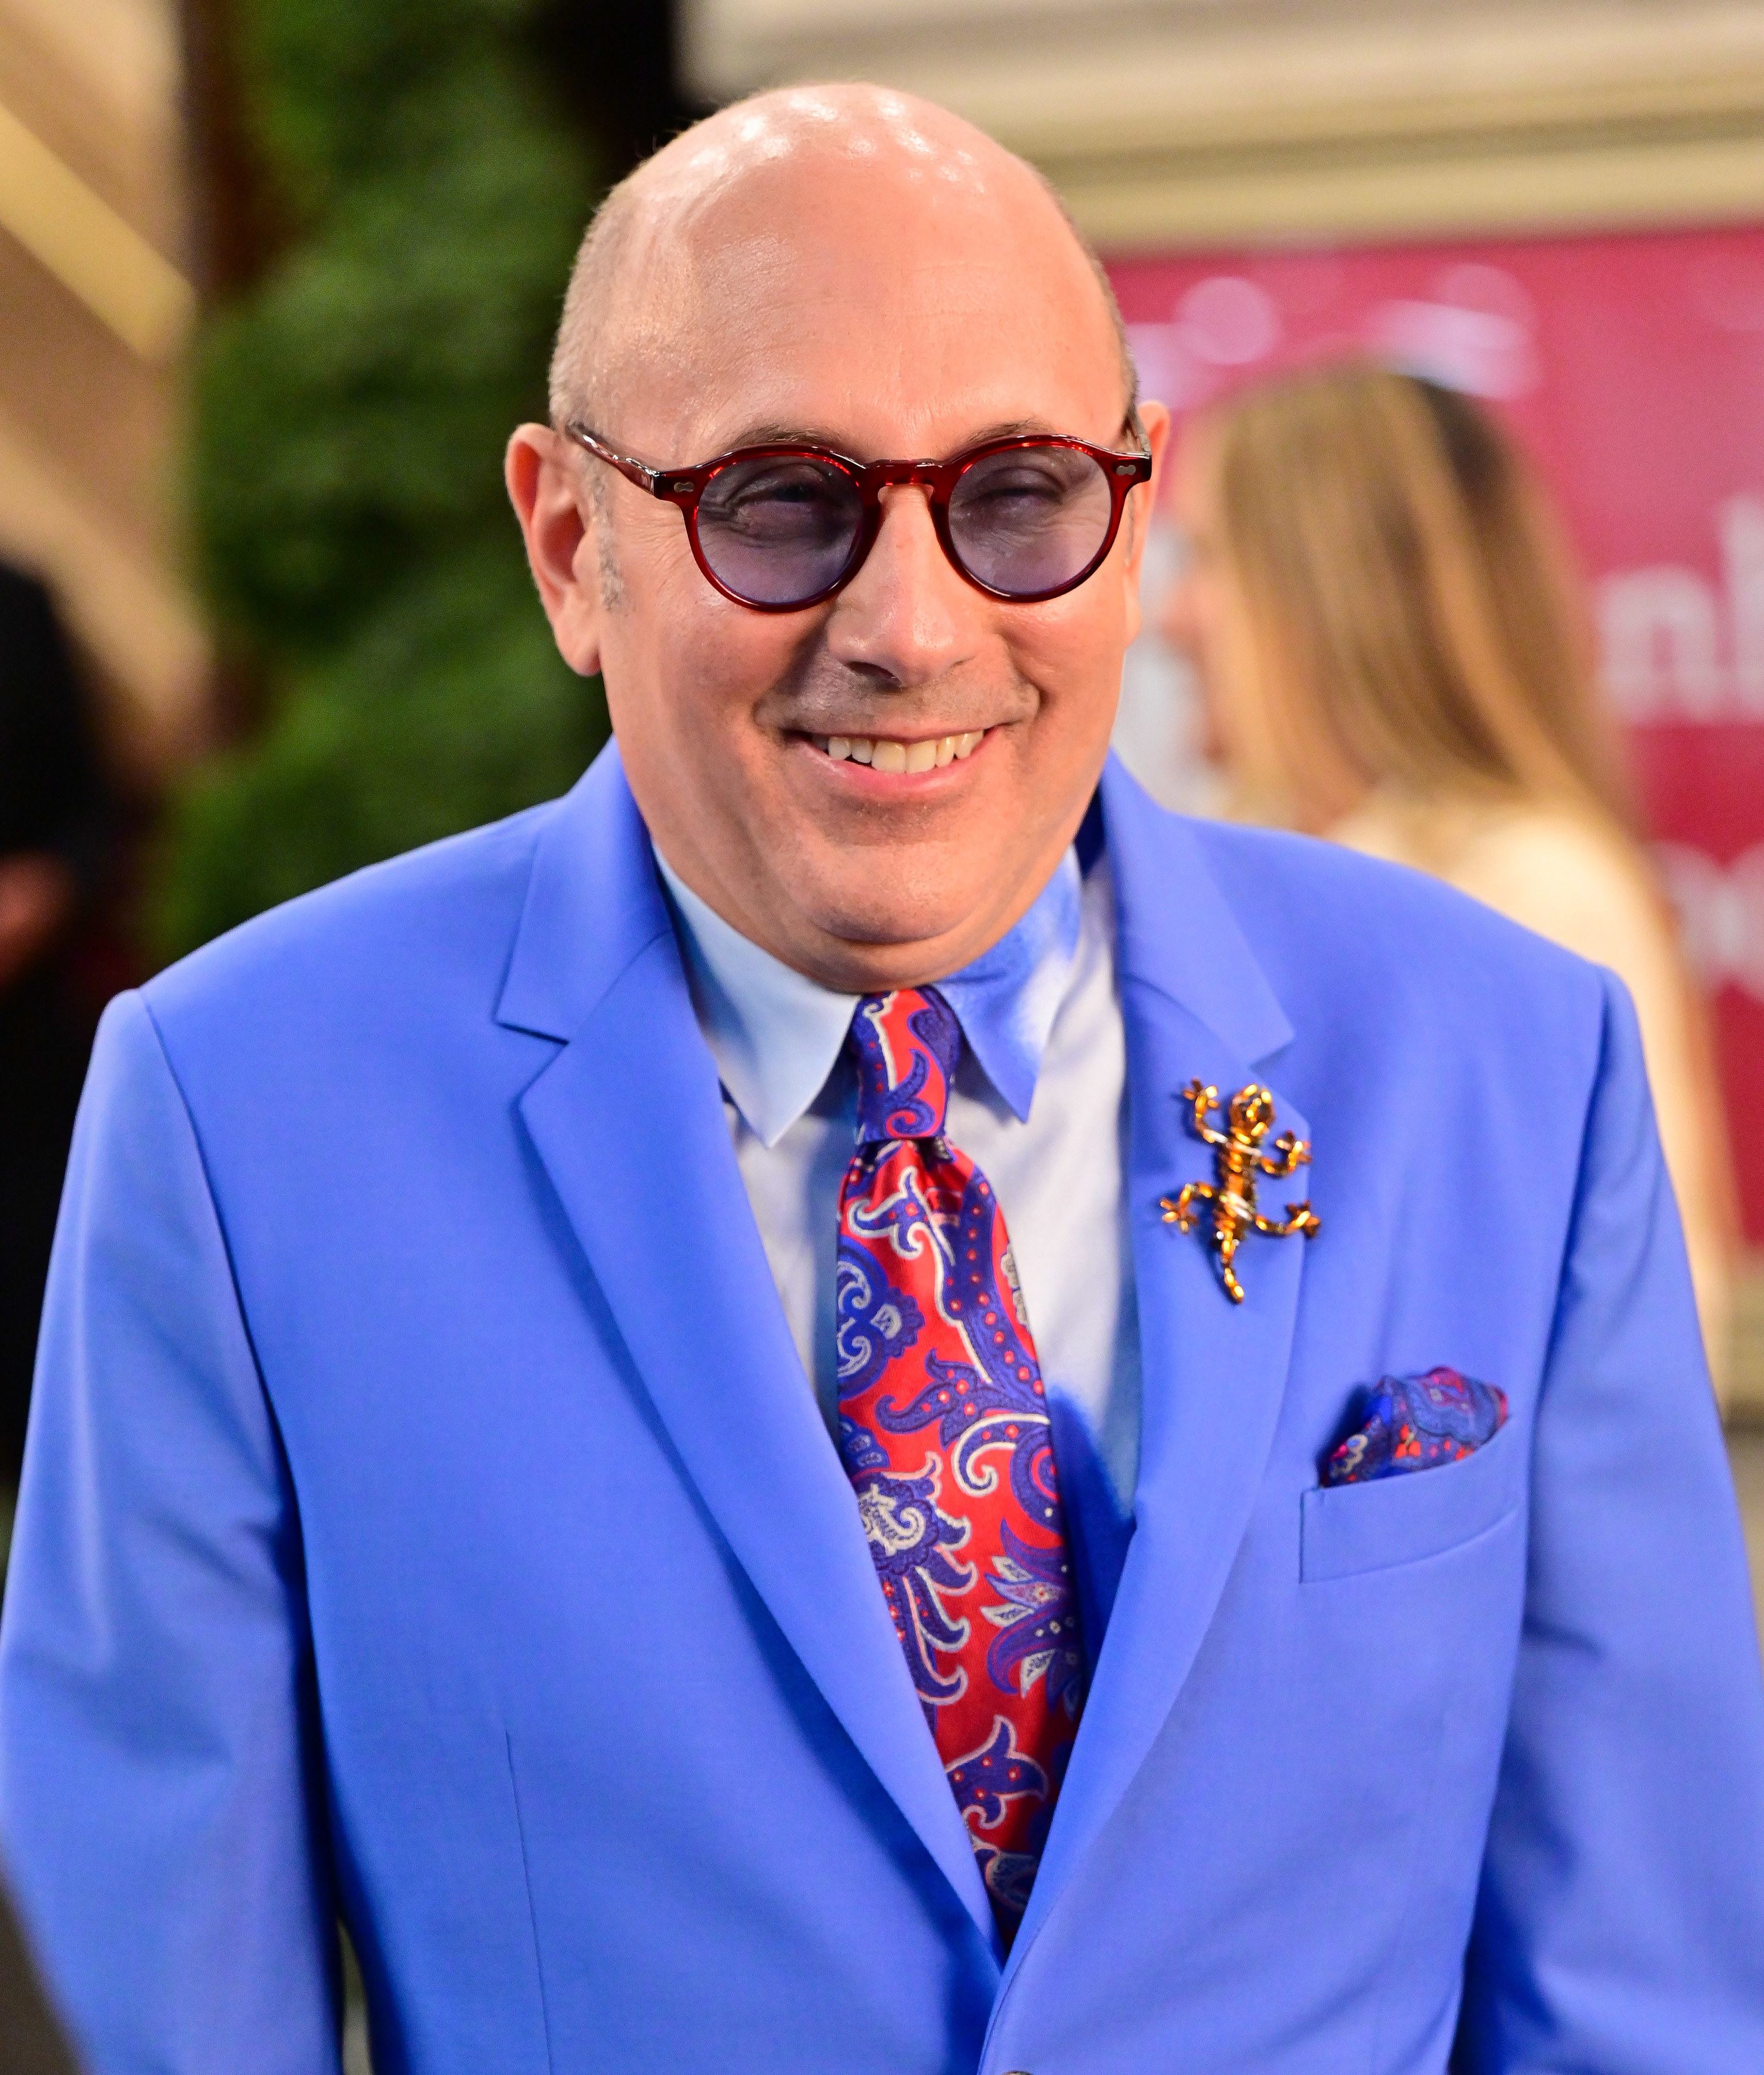 Willie Garson in a periwinkle suit on the set of the Sex and the City reboot